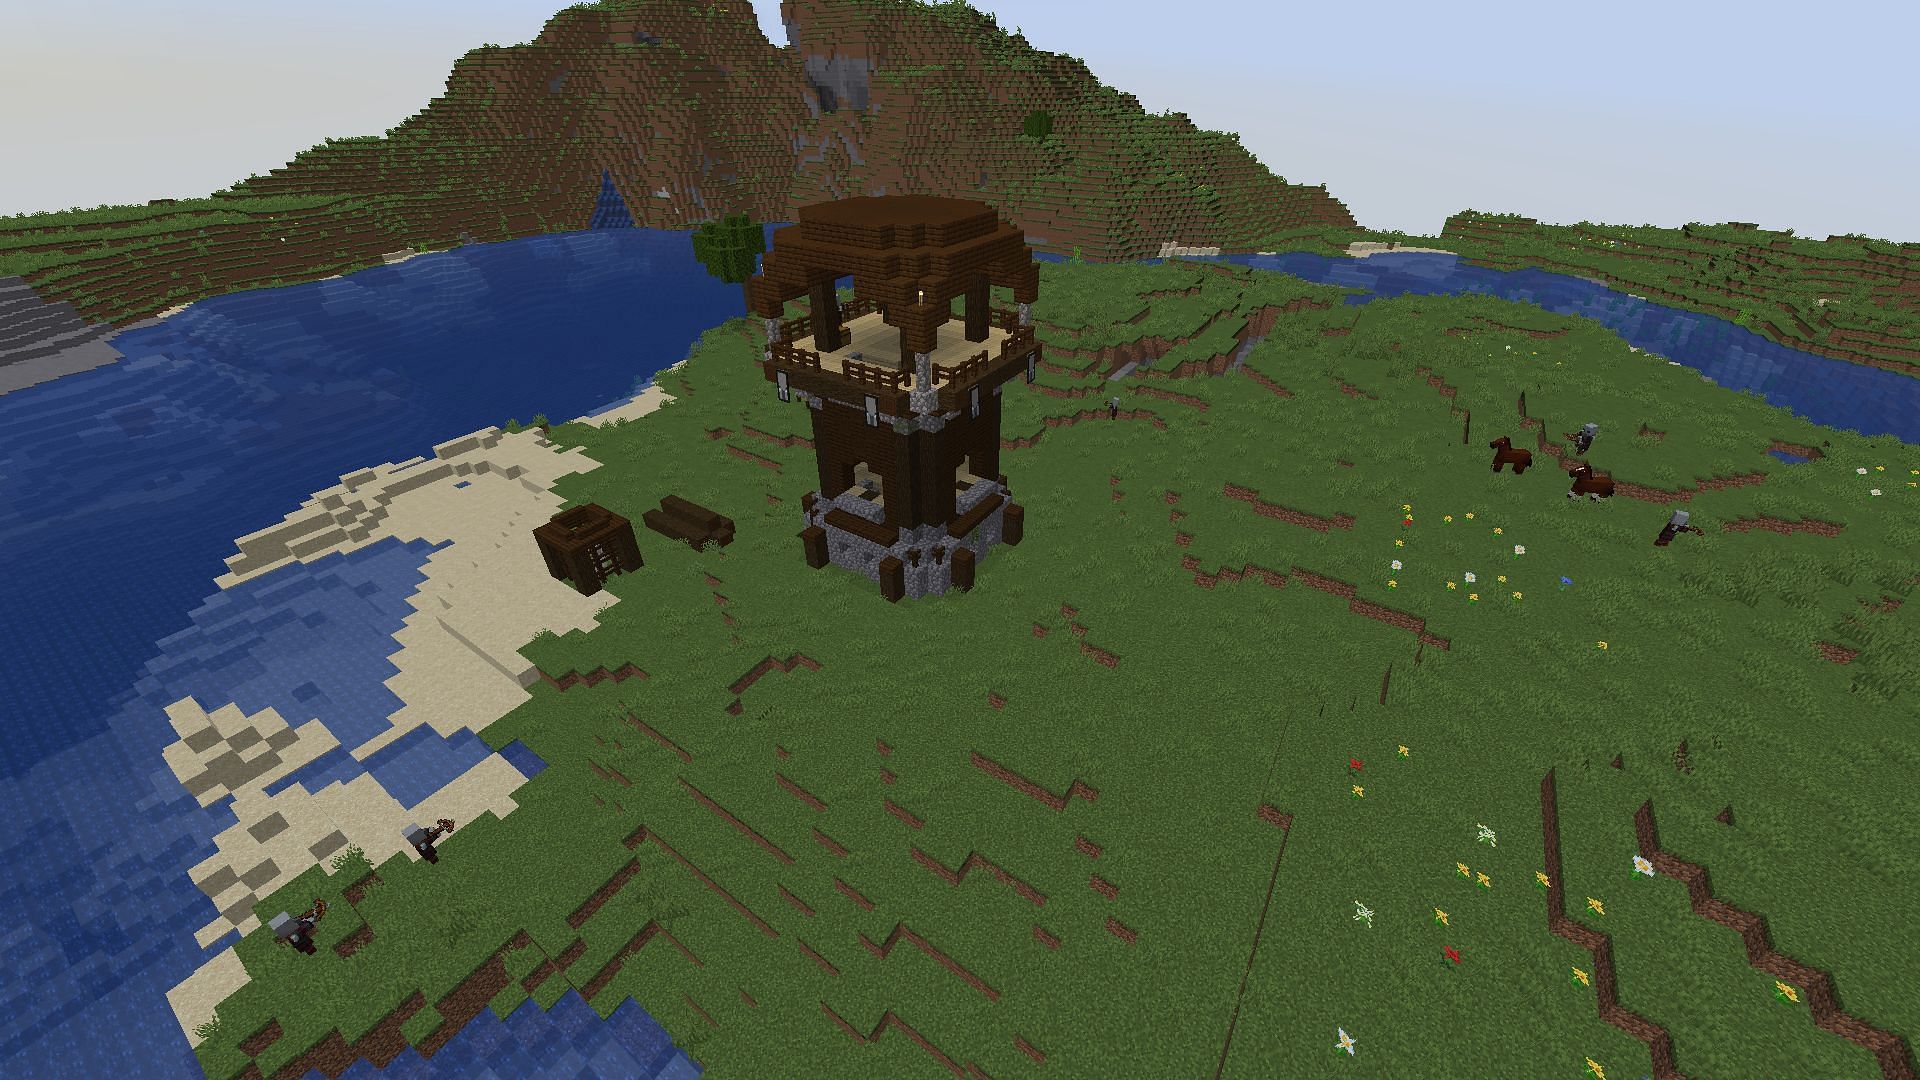 The pillager outpost the player spawns at (Image via Minecraft)